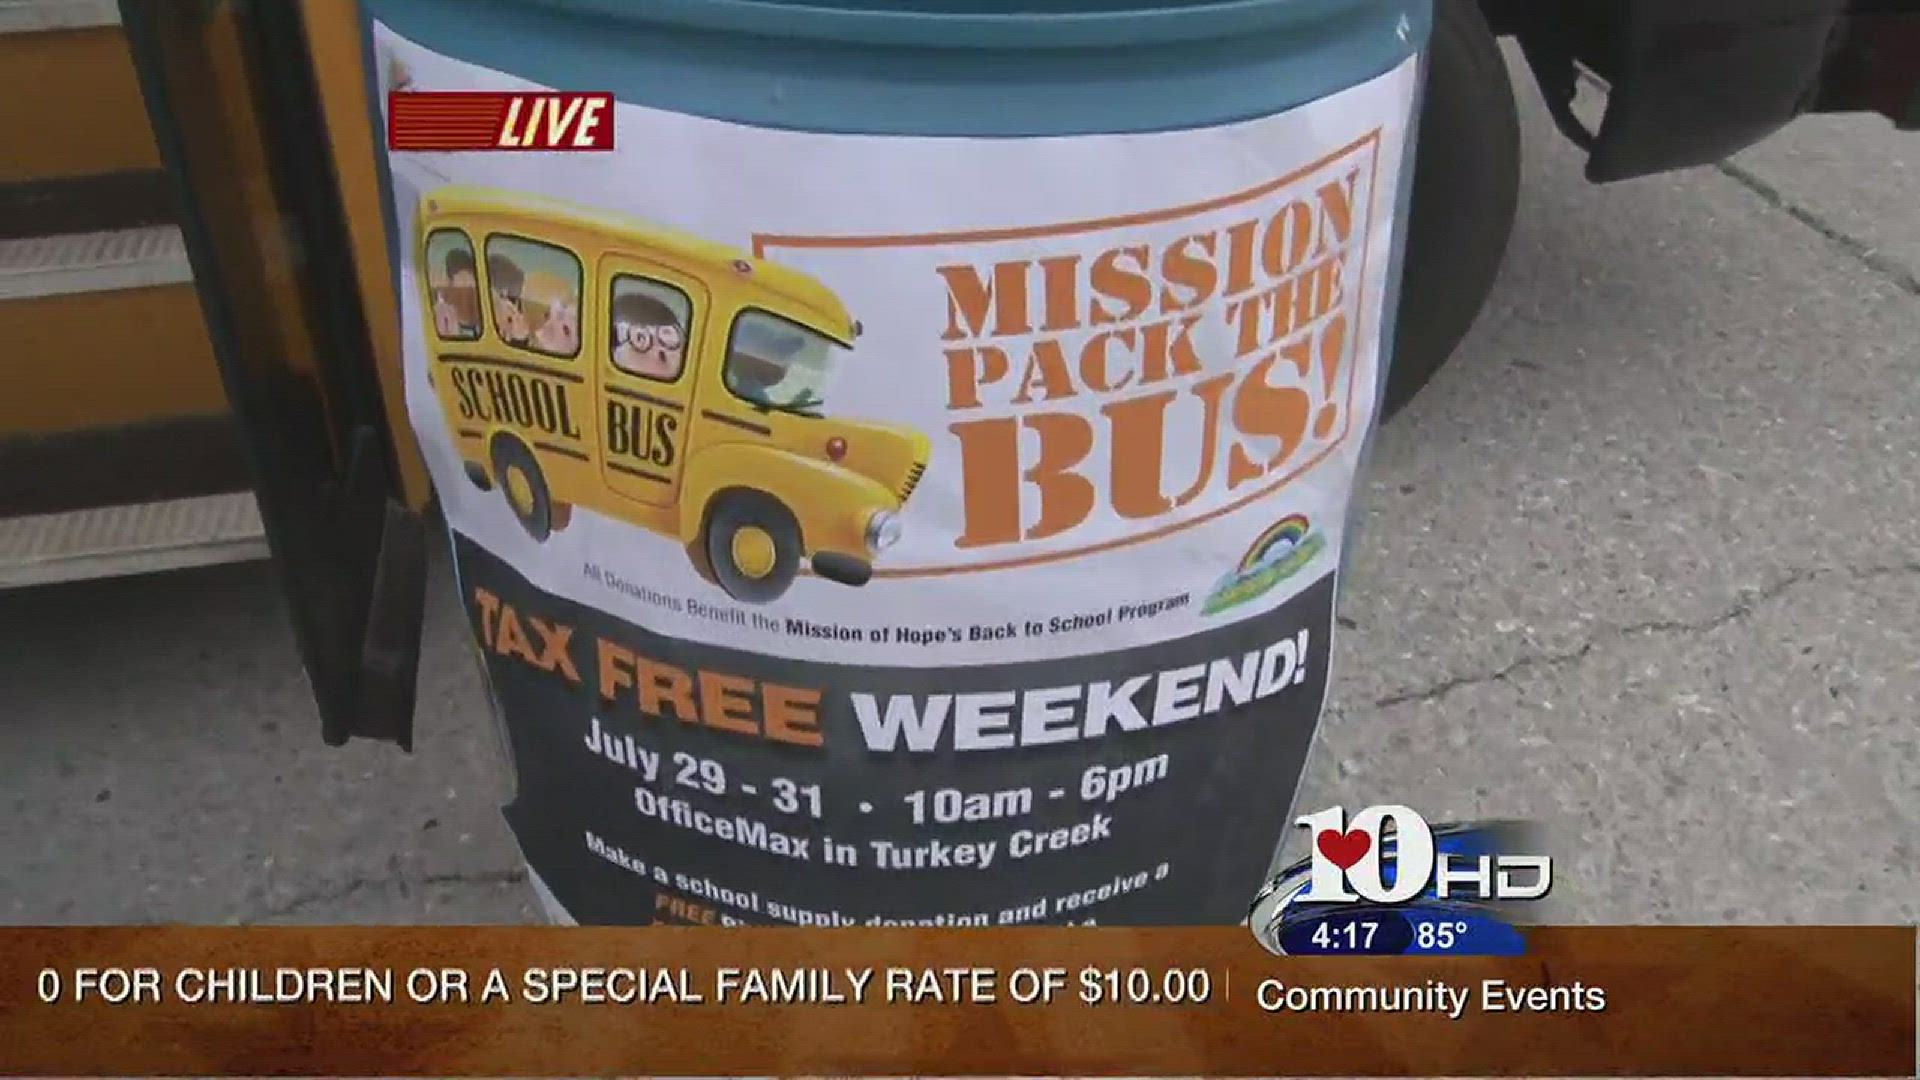 July 28, 2016Live at Five at 4School supplies will be collected at Turkey Creek this tax-free weekend for the Mission of Hope.  Bus will be parked outside Office Max July 29-31. For more information visit missionofhope.org